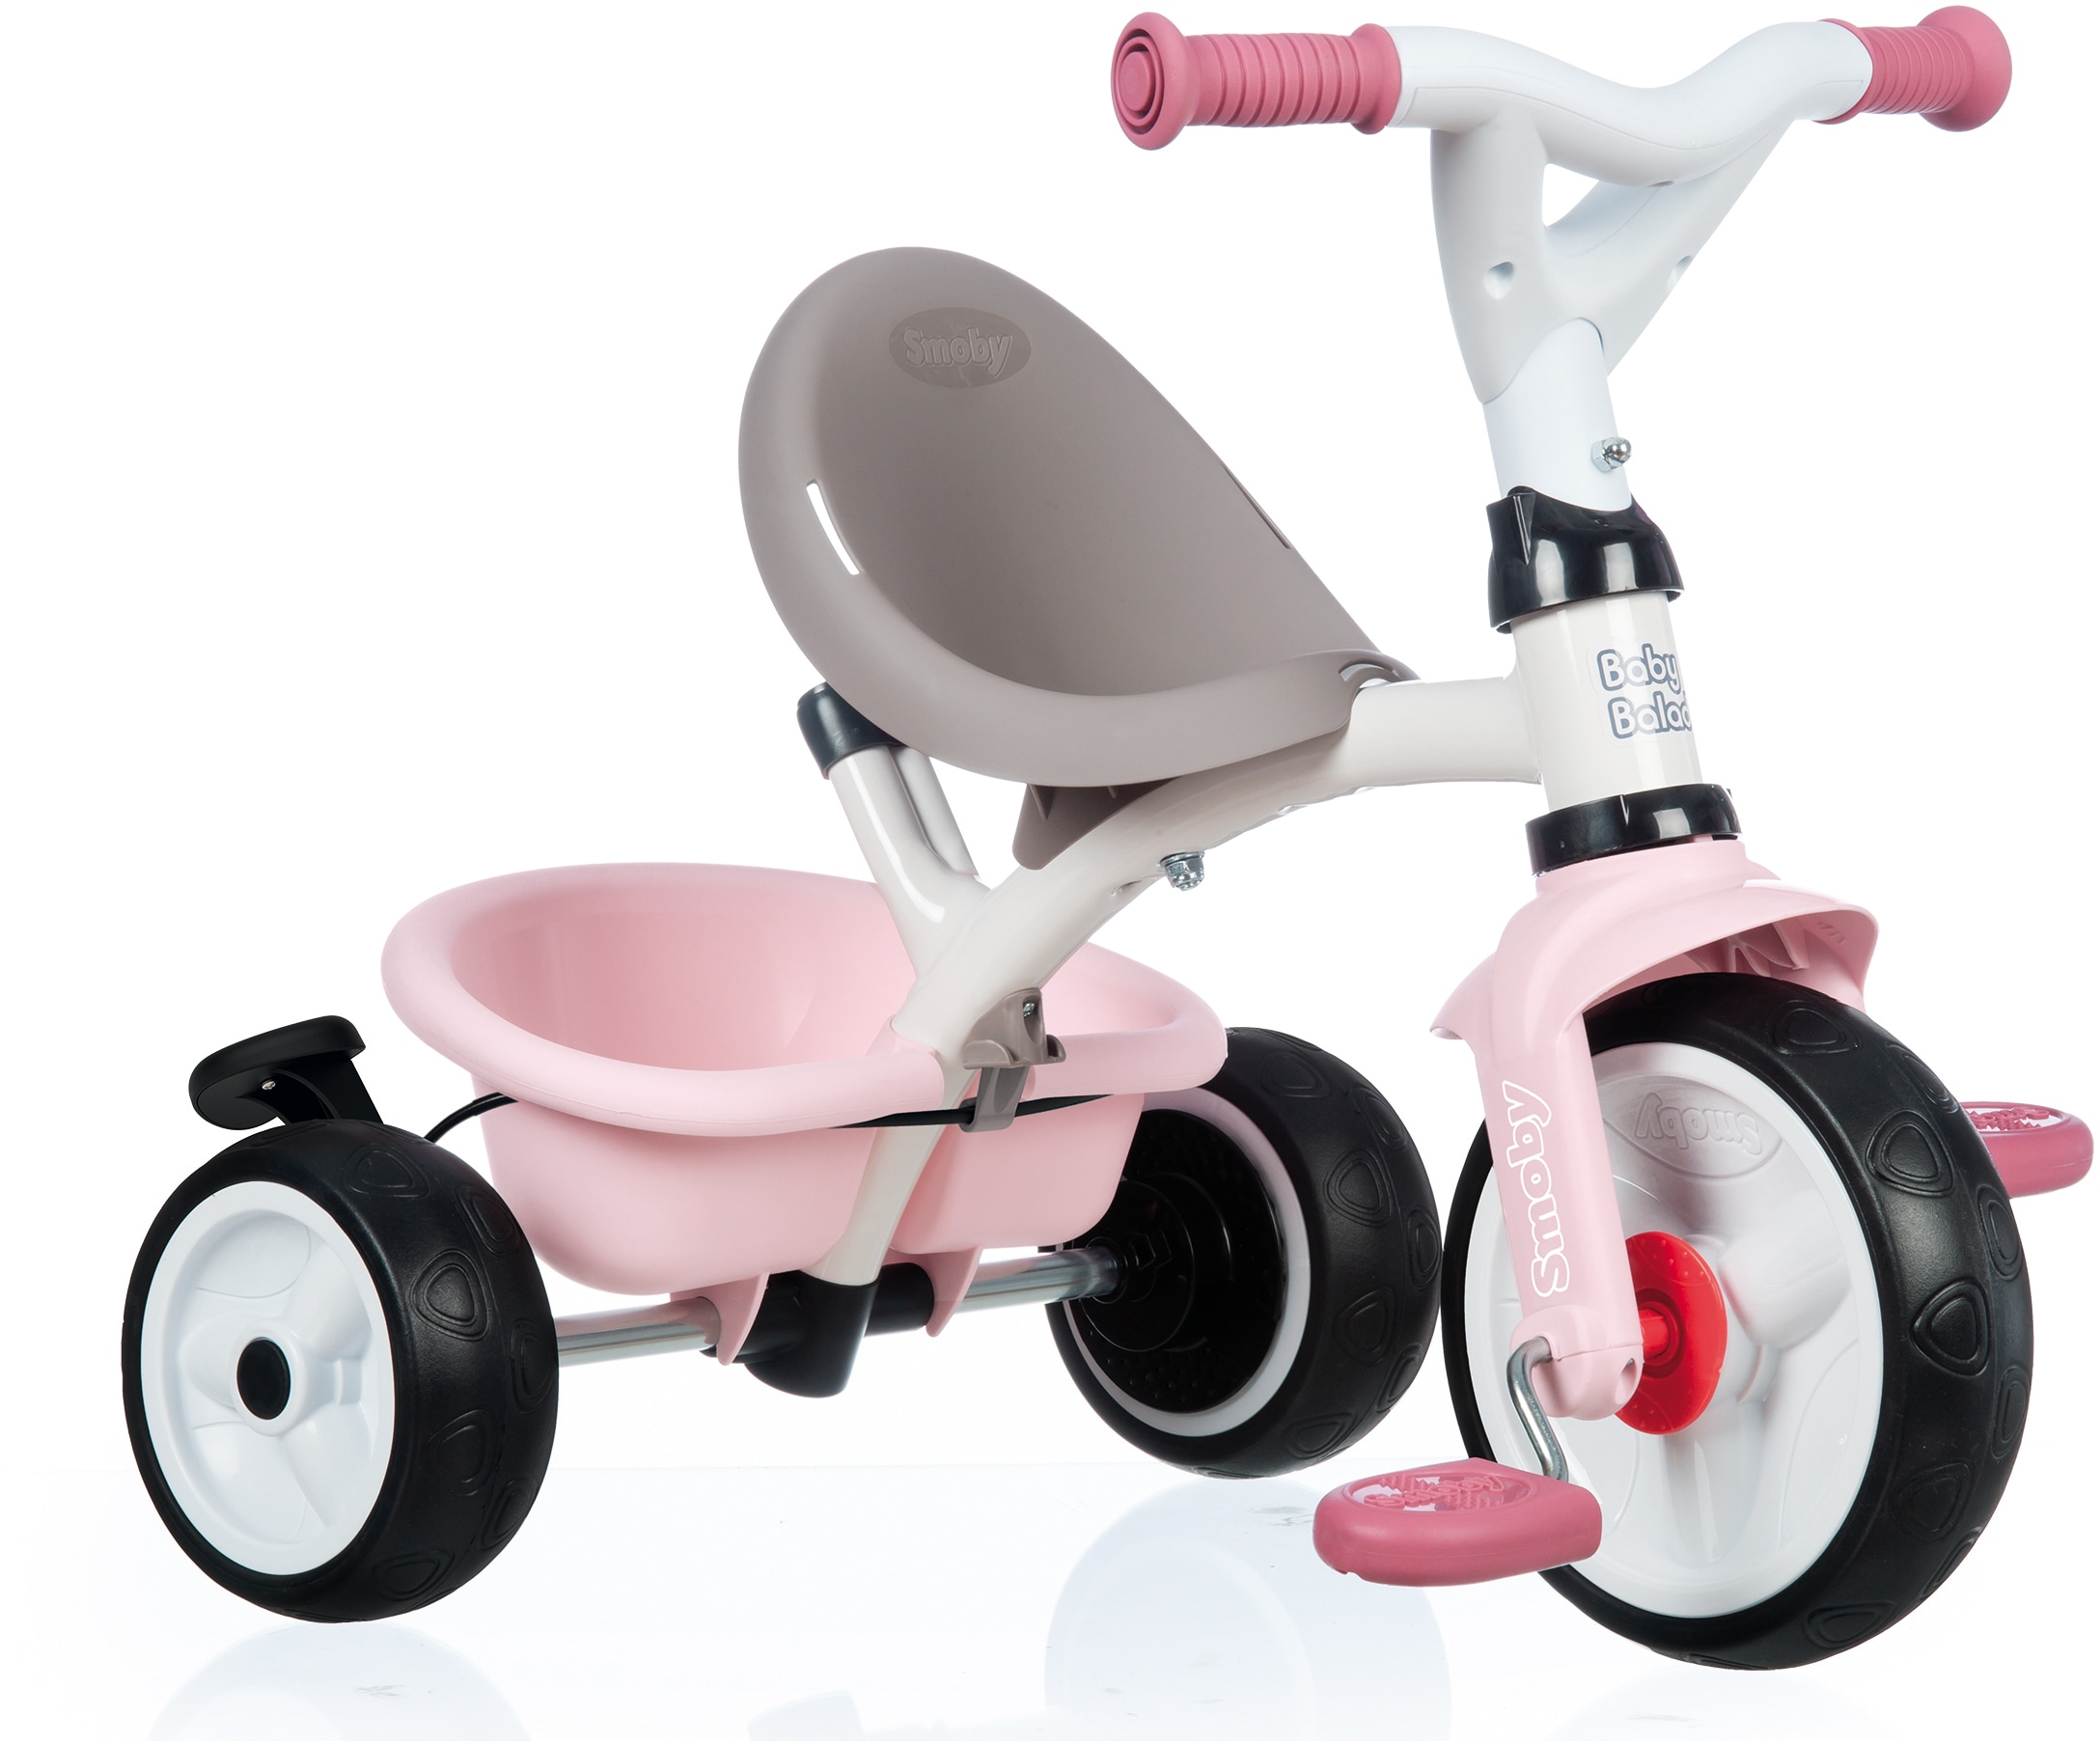 Smoby Dreirad »Baby Balade Plus, bei Europe mit in Made rosa«, Sonnendach